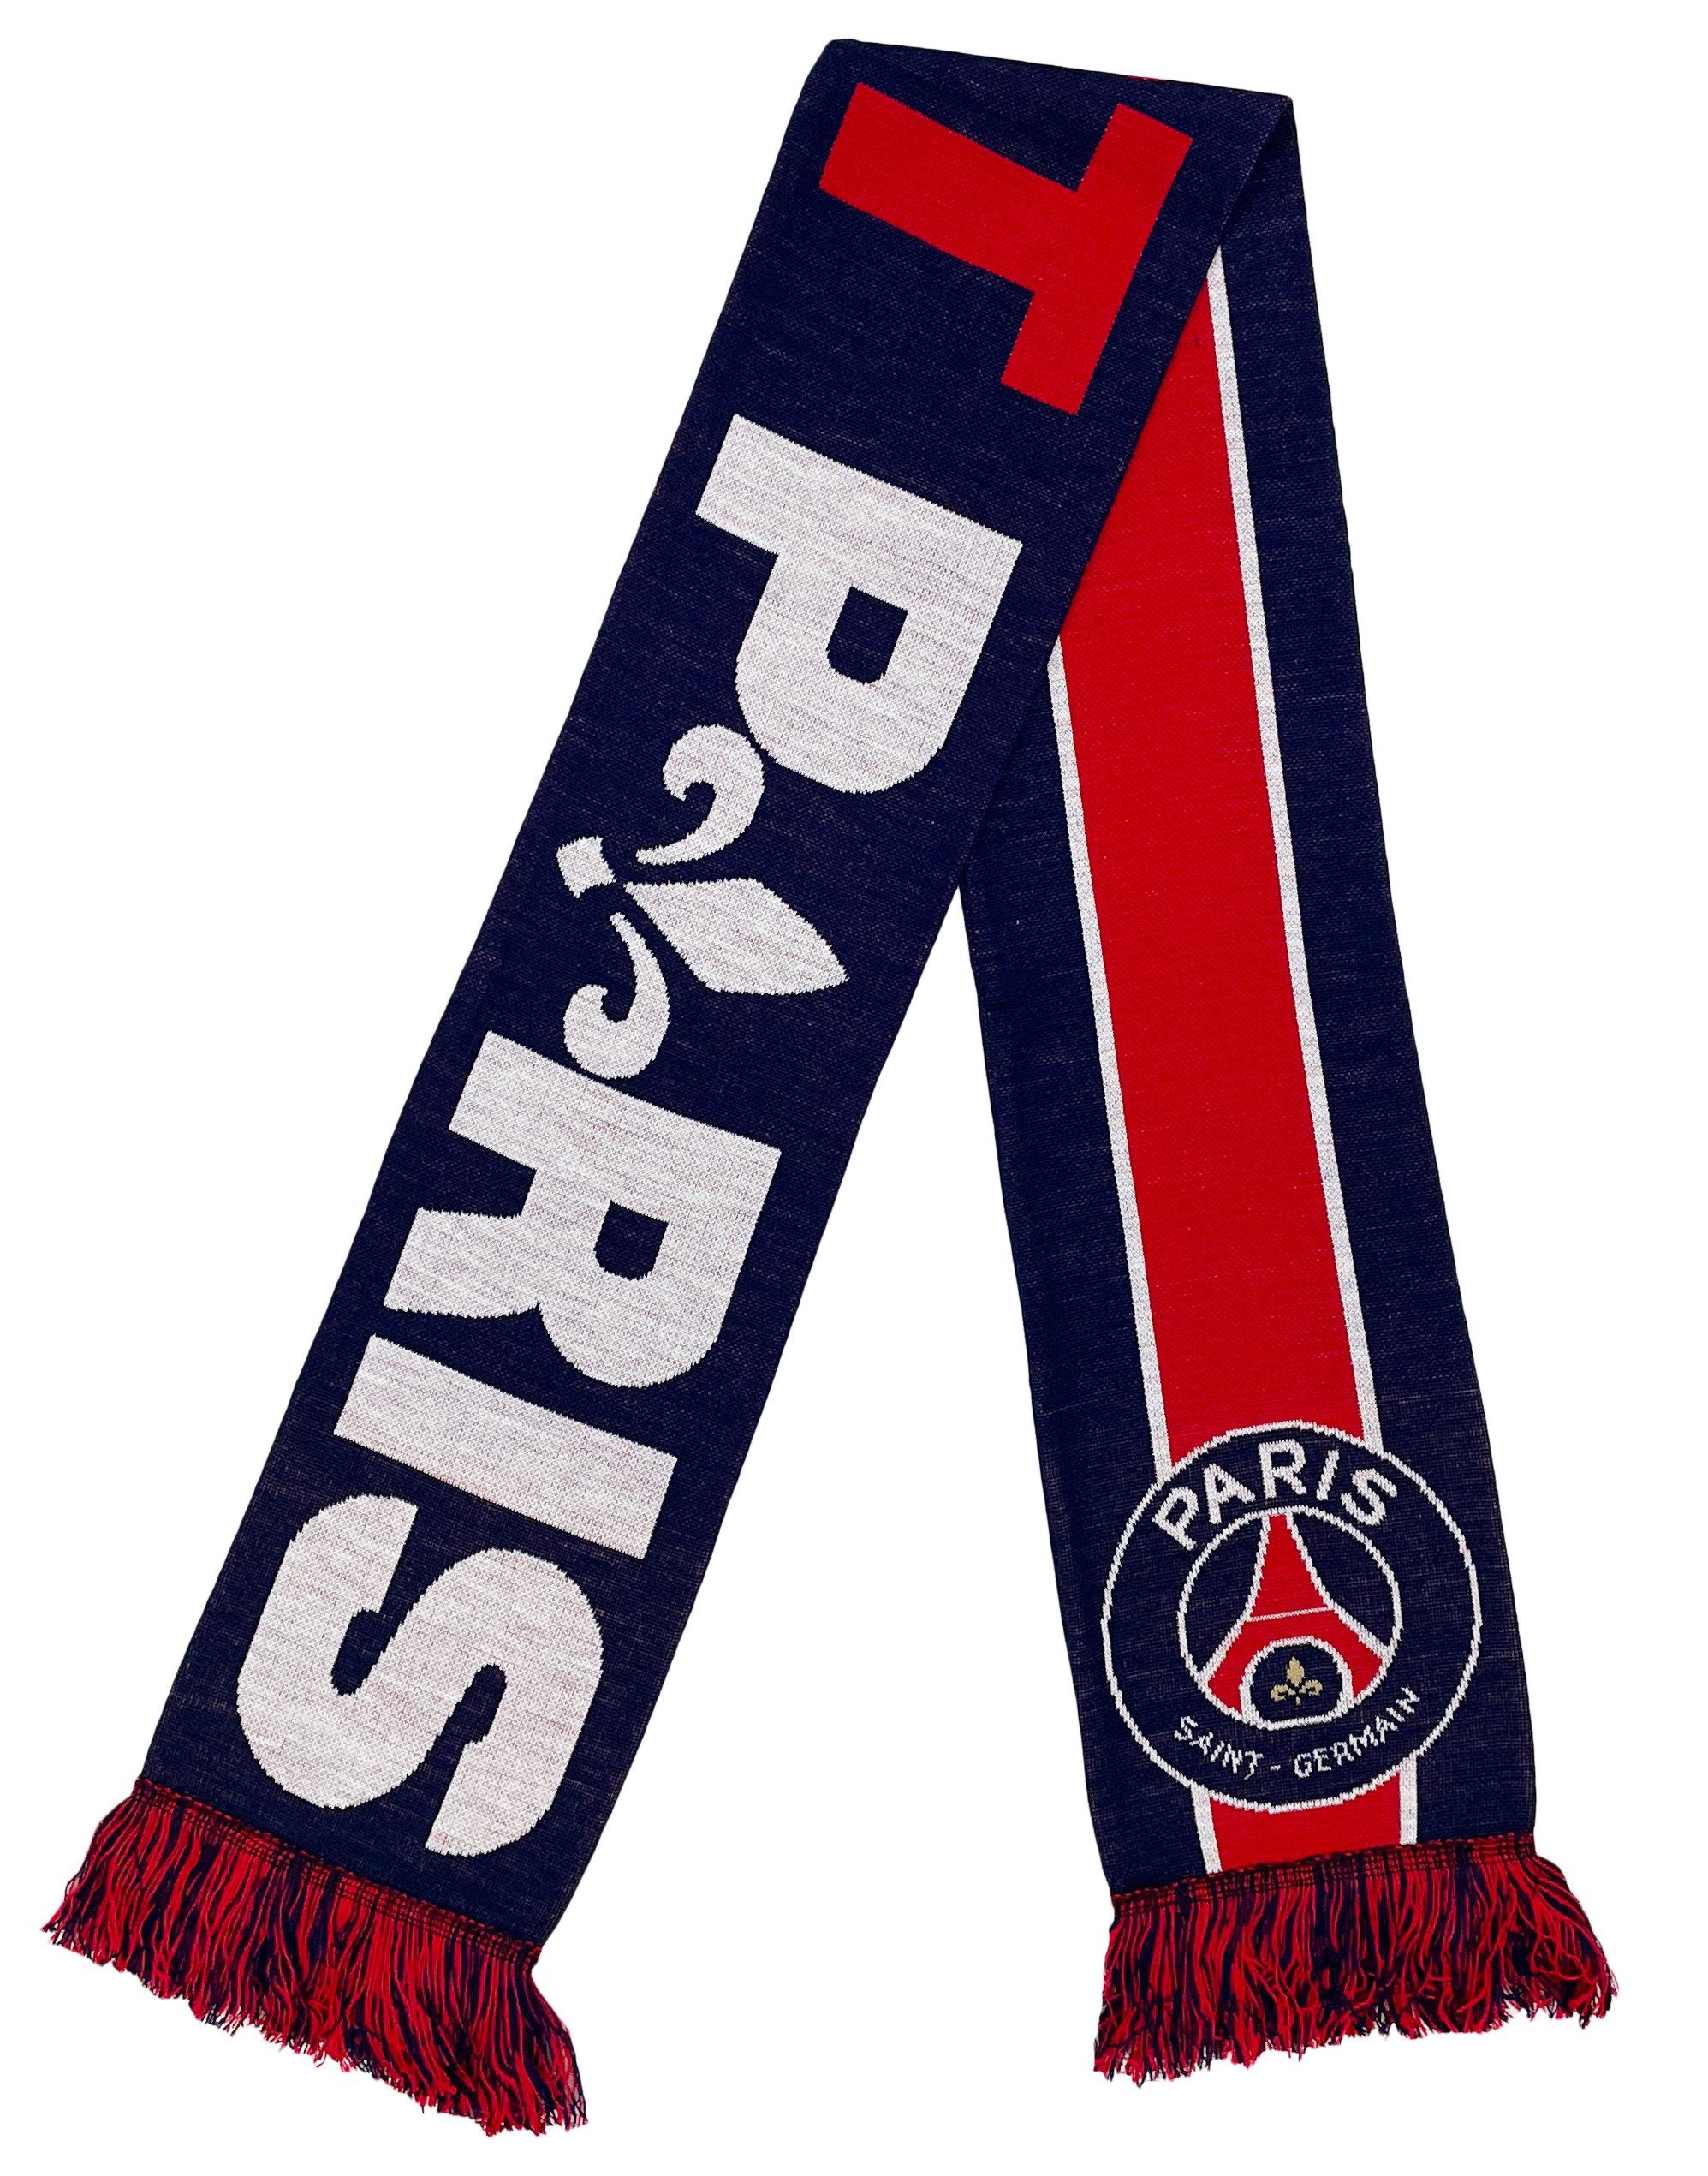 This　(HD　Ruffneck　–　Knit)　Is　Paris　Scarf　PSG　Scarves